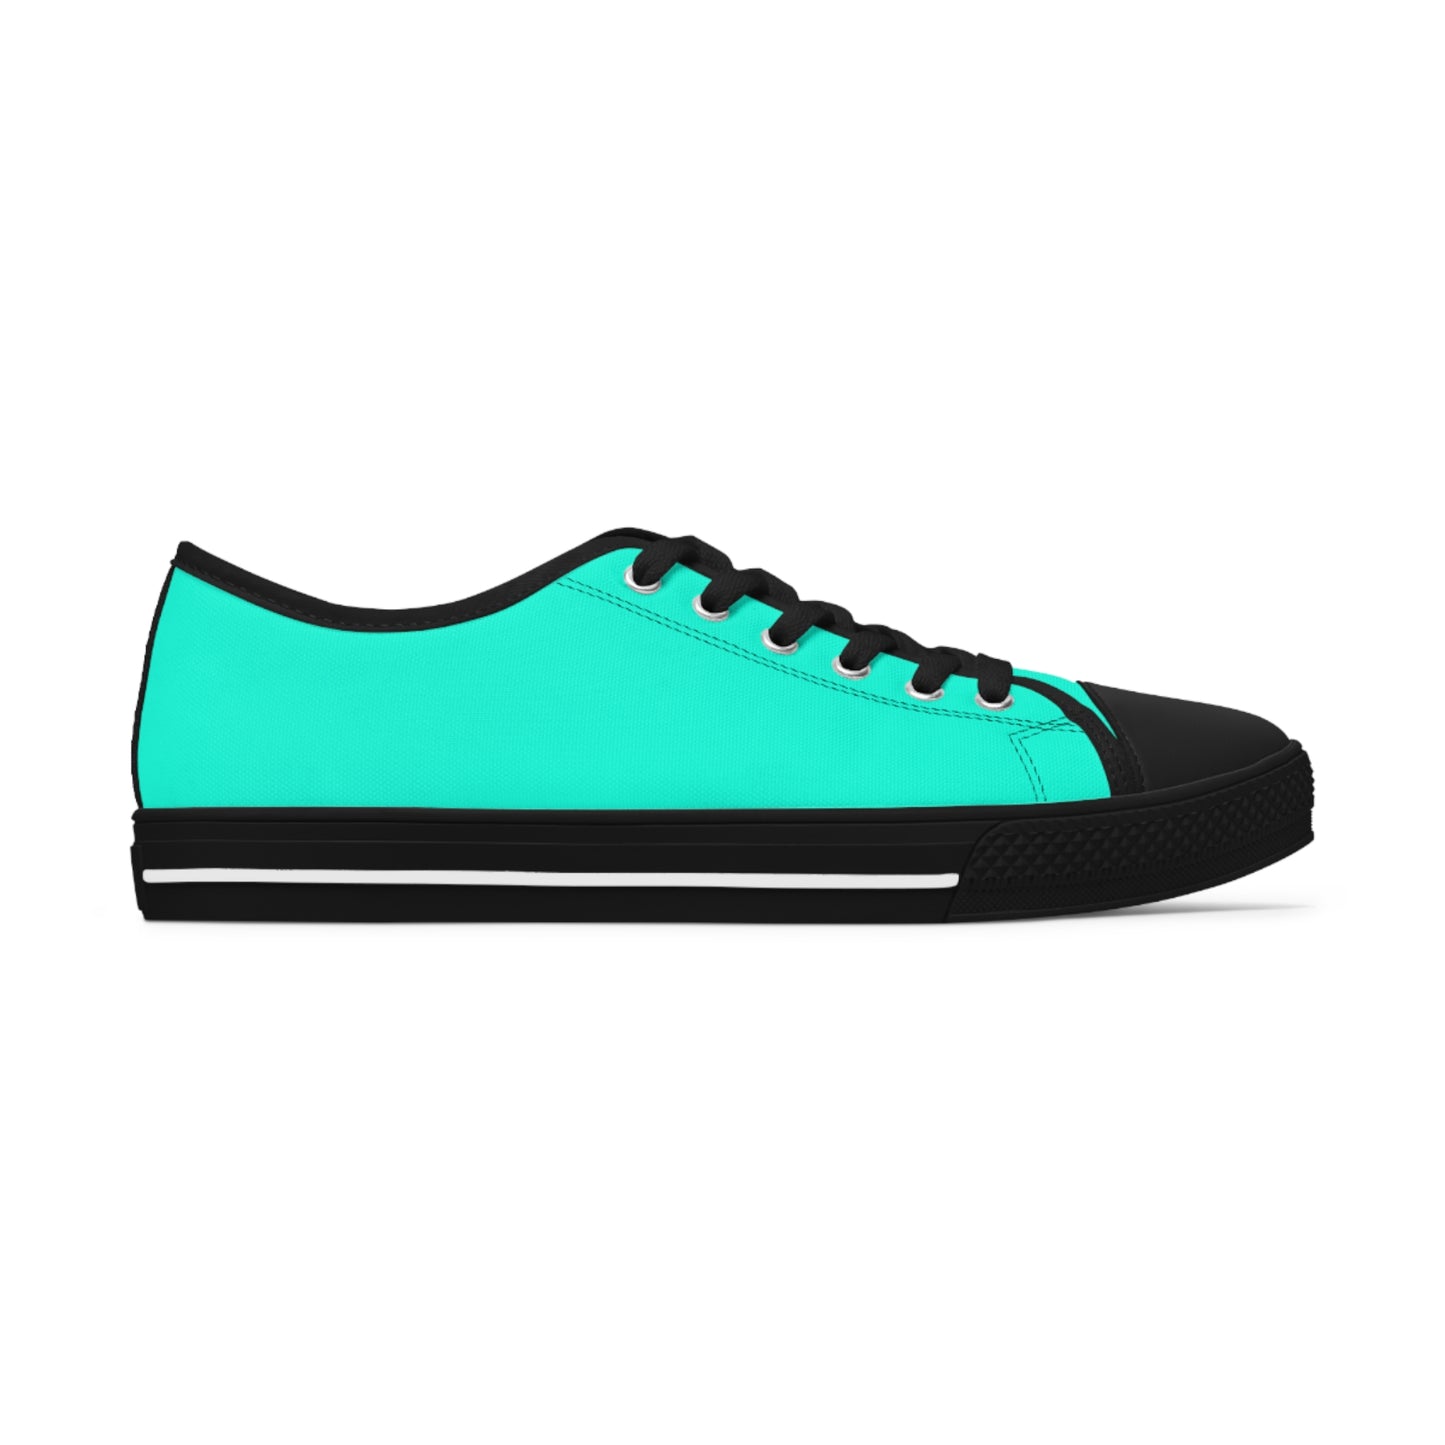 Women's Canvas Low Top Solid Color Sneakers - Cool Pool Aqua Green US 12 White sole